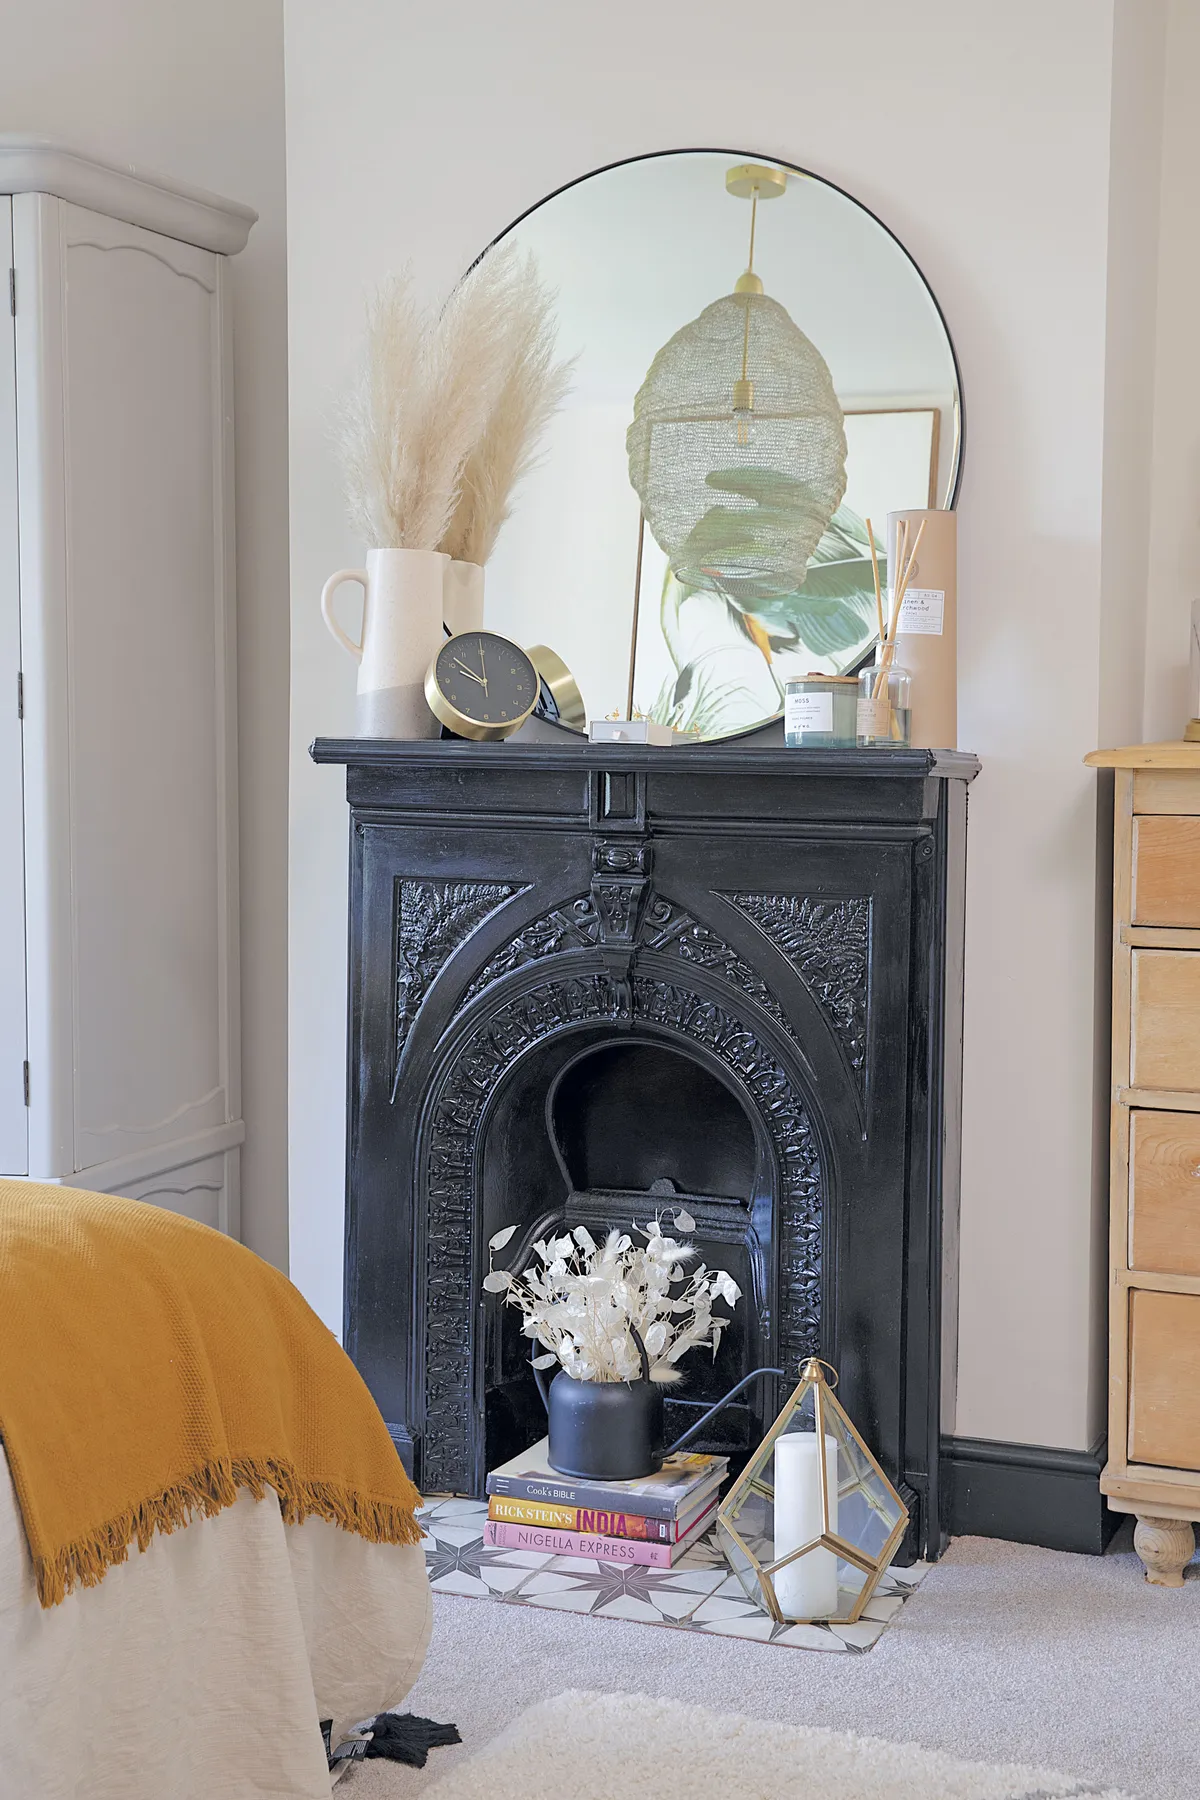 ‘We painted the reclaimed fireplace black for a more dramatic look and propped a mirror from Wayfair above,’ says Laura. ‘The wardrobe came from a furniture auction and I painted it pale grey when we moved here’